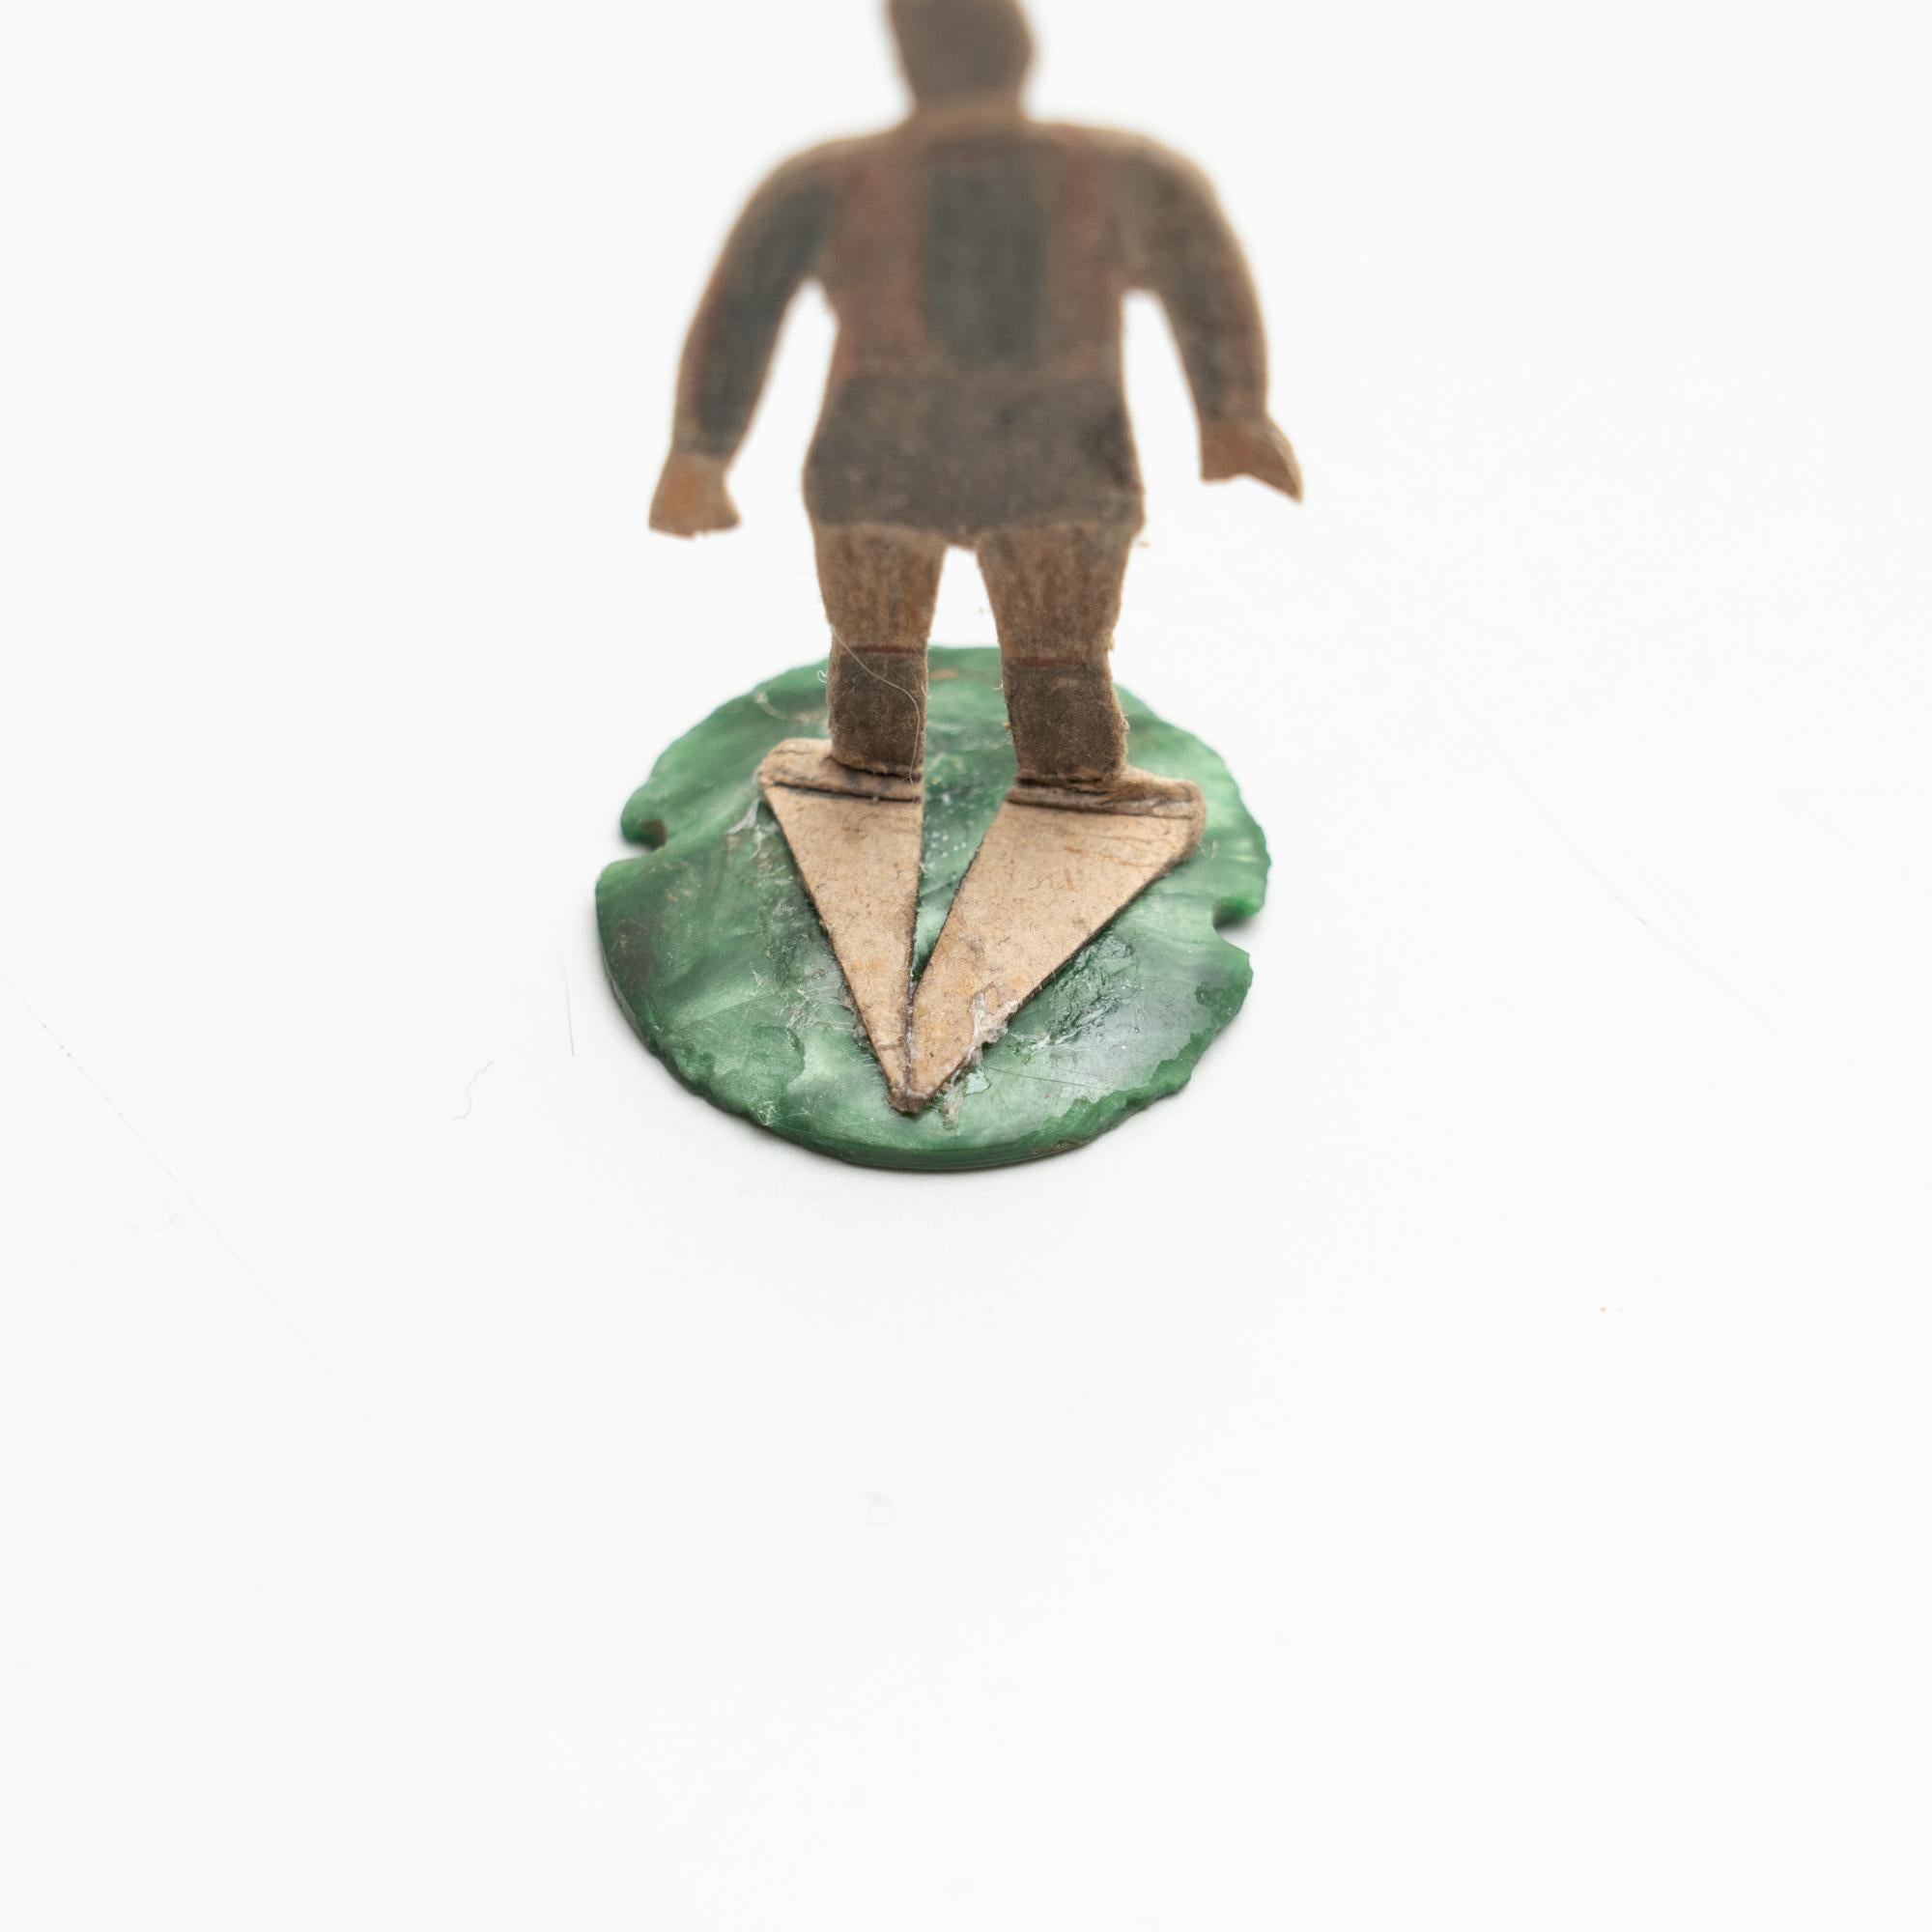 Traditional Antique Button Soccer Game Figure, circa 1950 For Sale 6